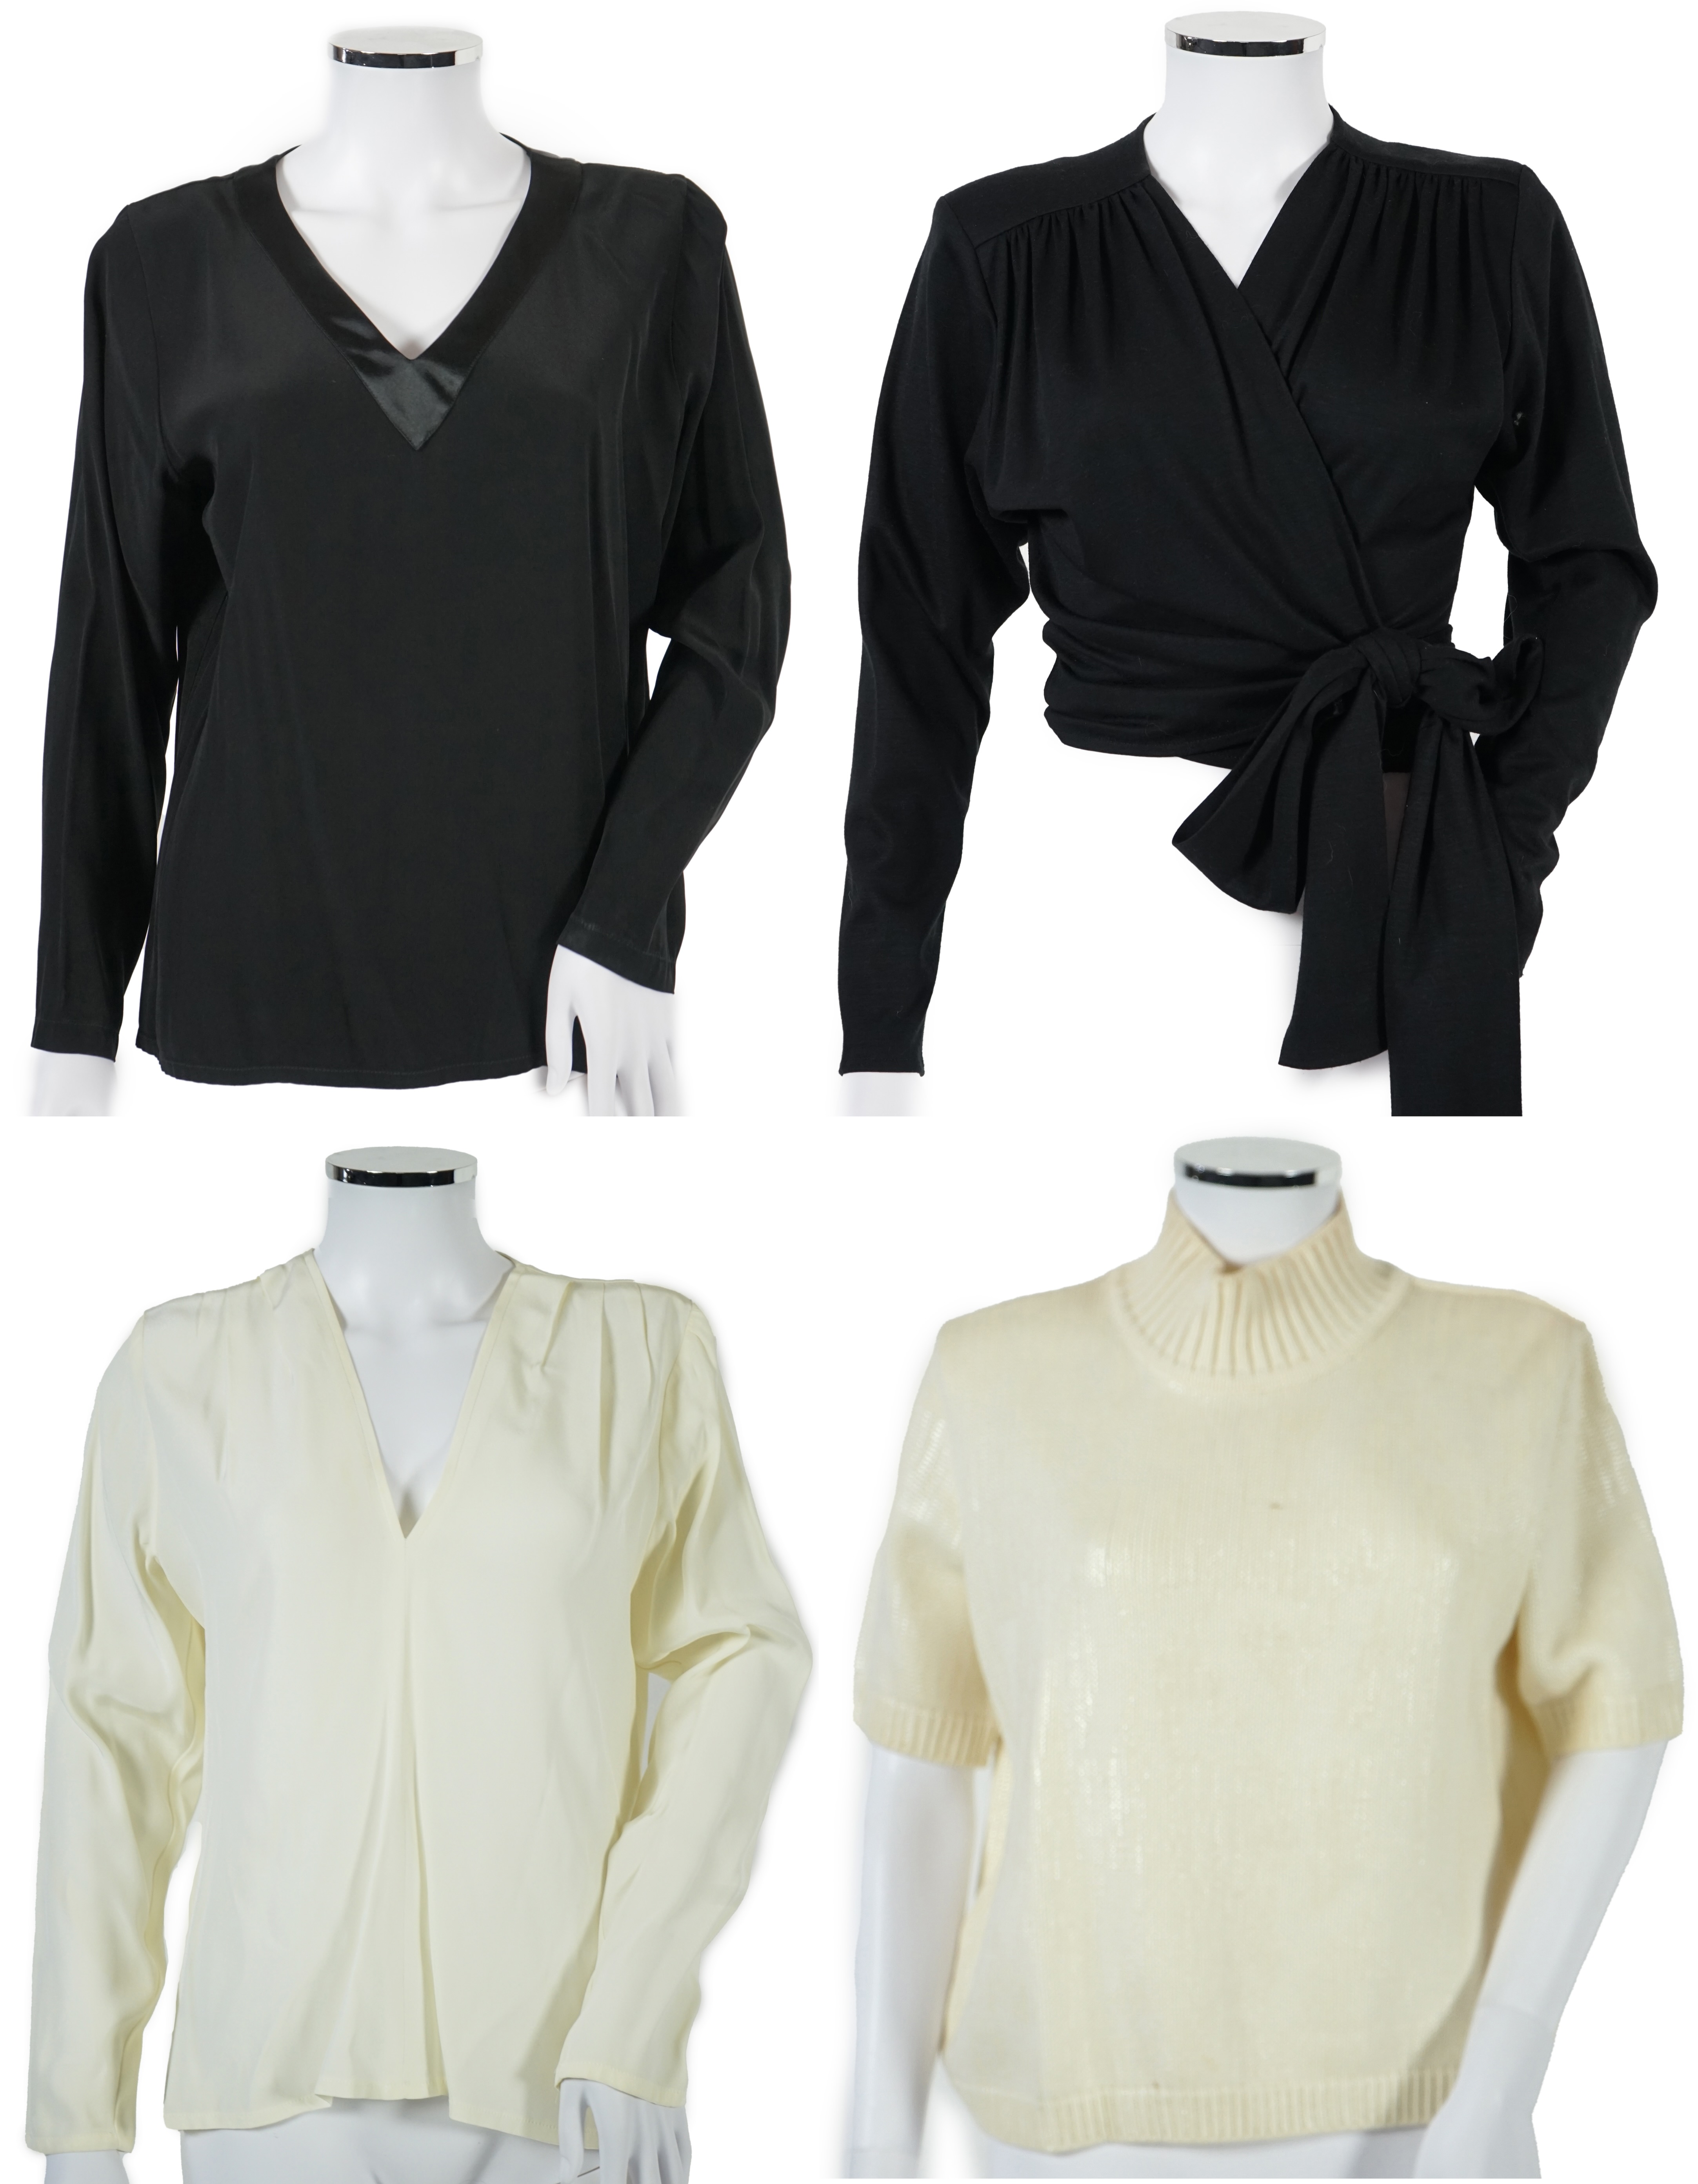 Four vintage Yves Saint Laurent variation lady's tops, F 40 (UK 12).Proceeds to Happy Paws Puppy Rescue